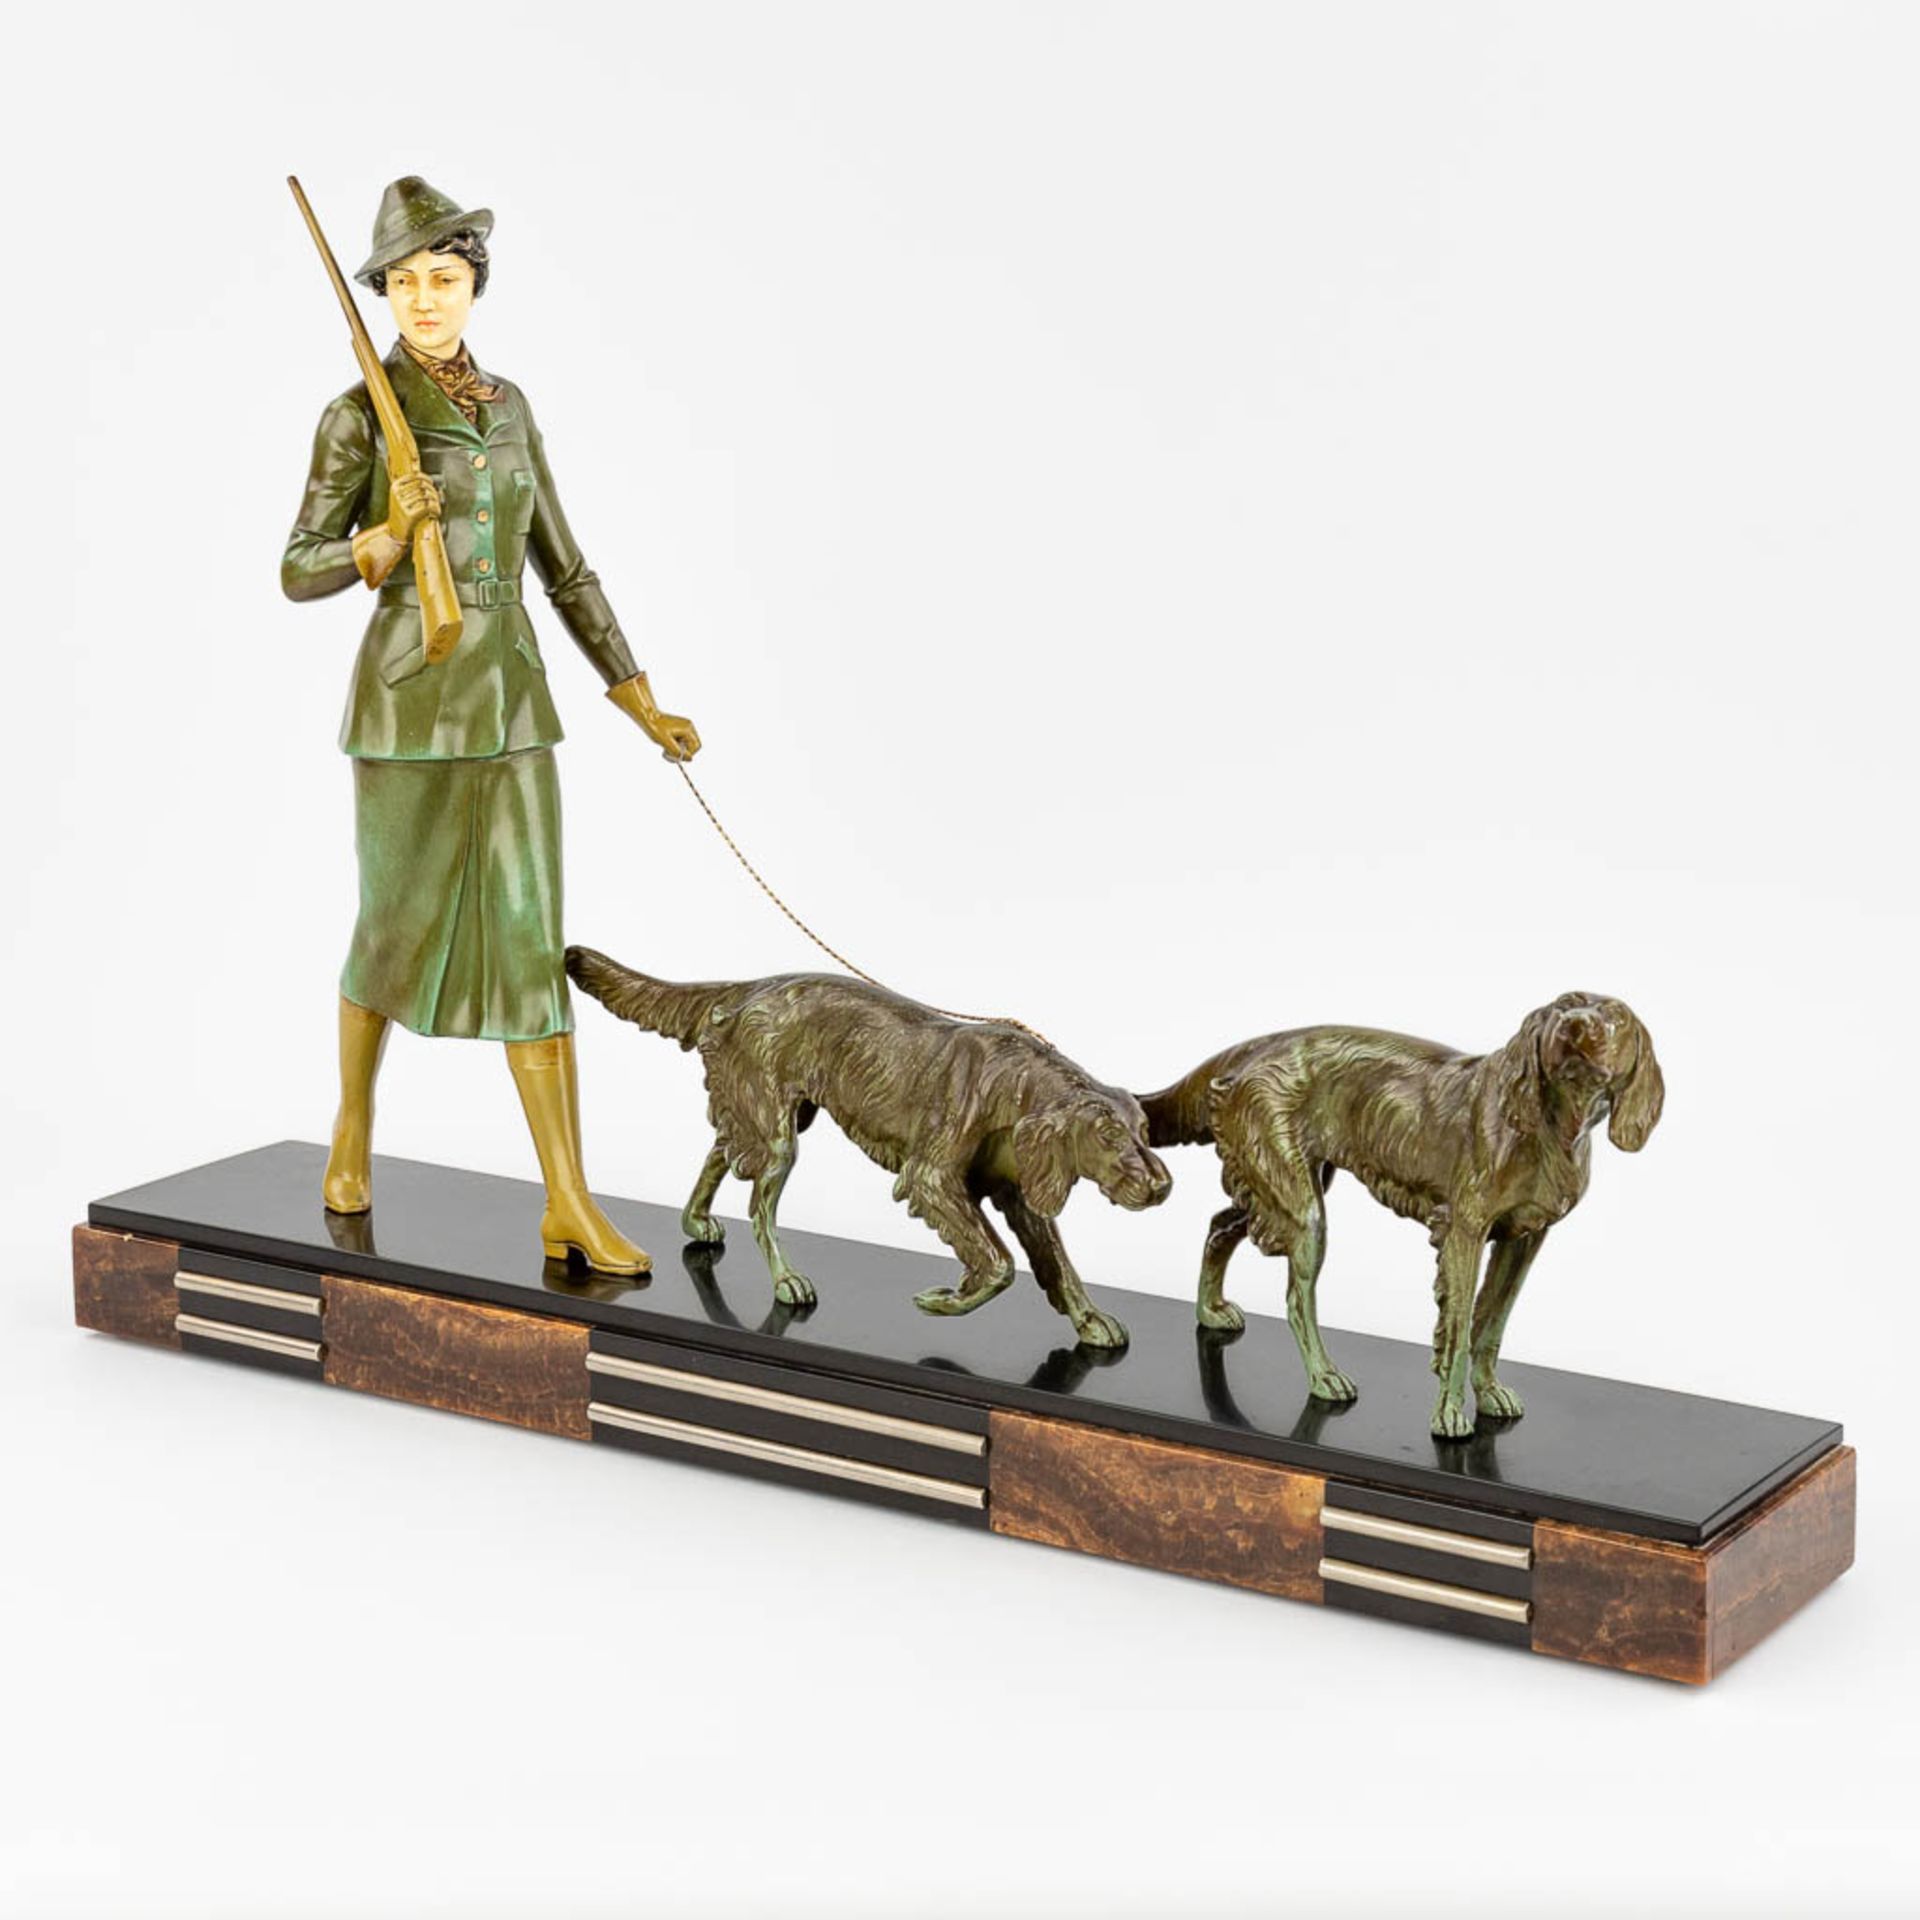 'Depart Pour La Chasse', a statue made in art deco style of marble and spelter. (12 x 67 x 45cm) - Image 5 of 13